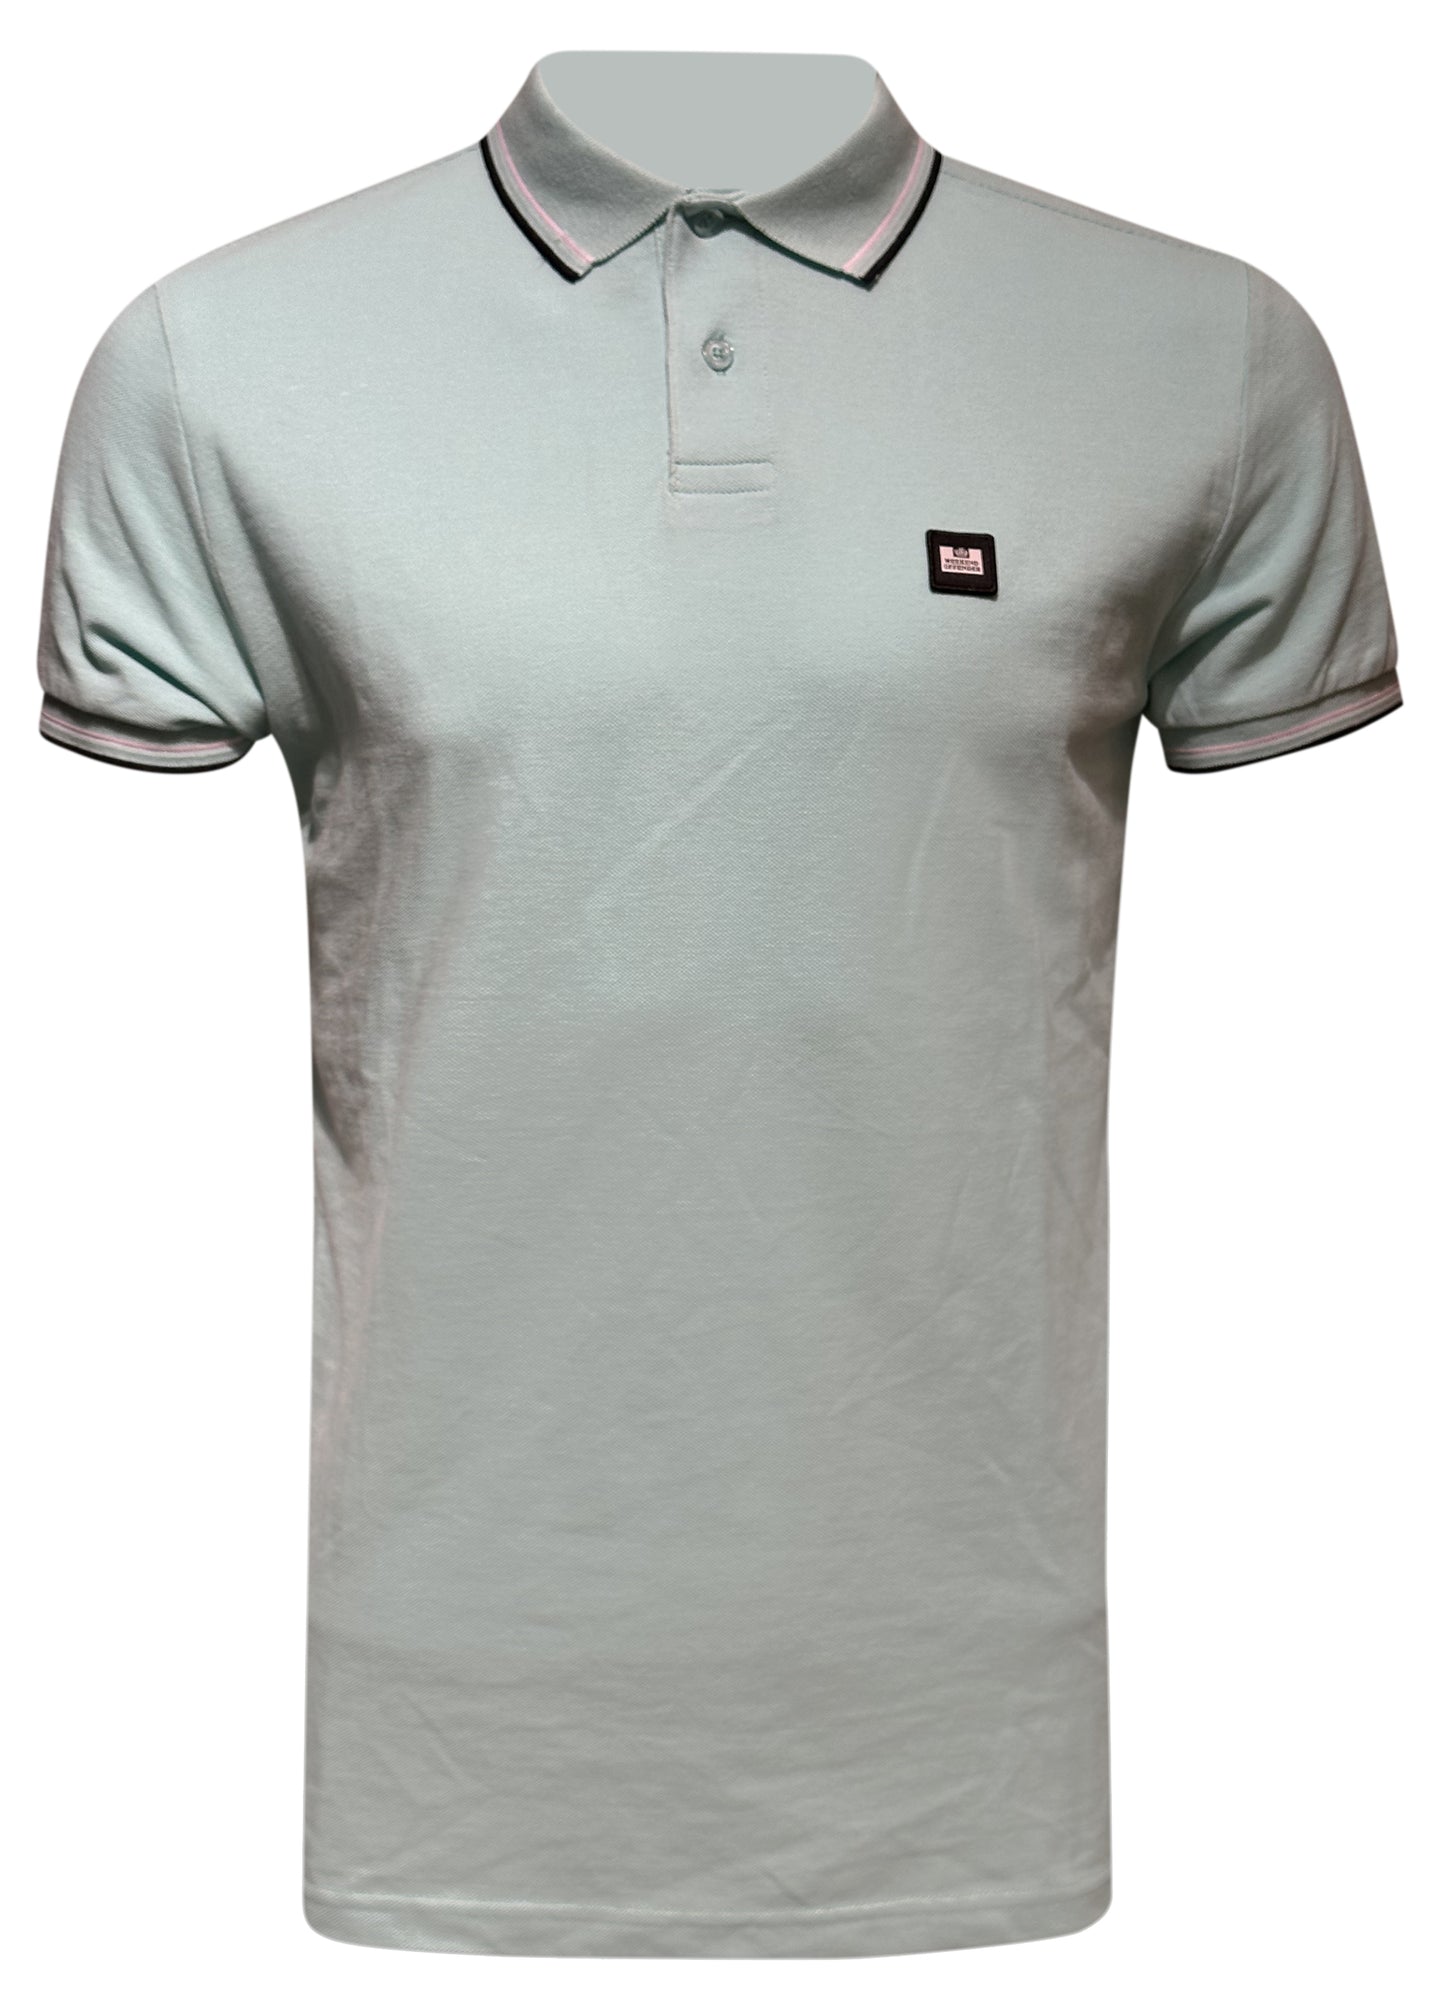 Weekend Offender - Temple City Tipping Polo Shirt - 300391 - Aqua